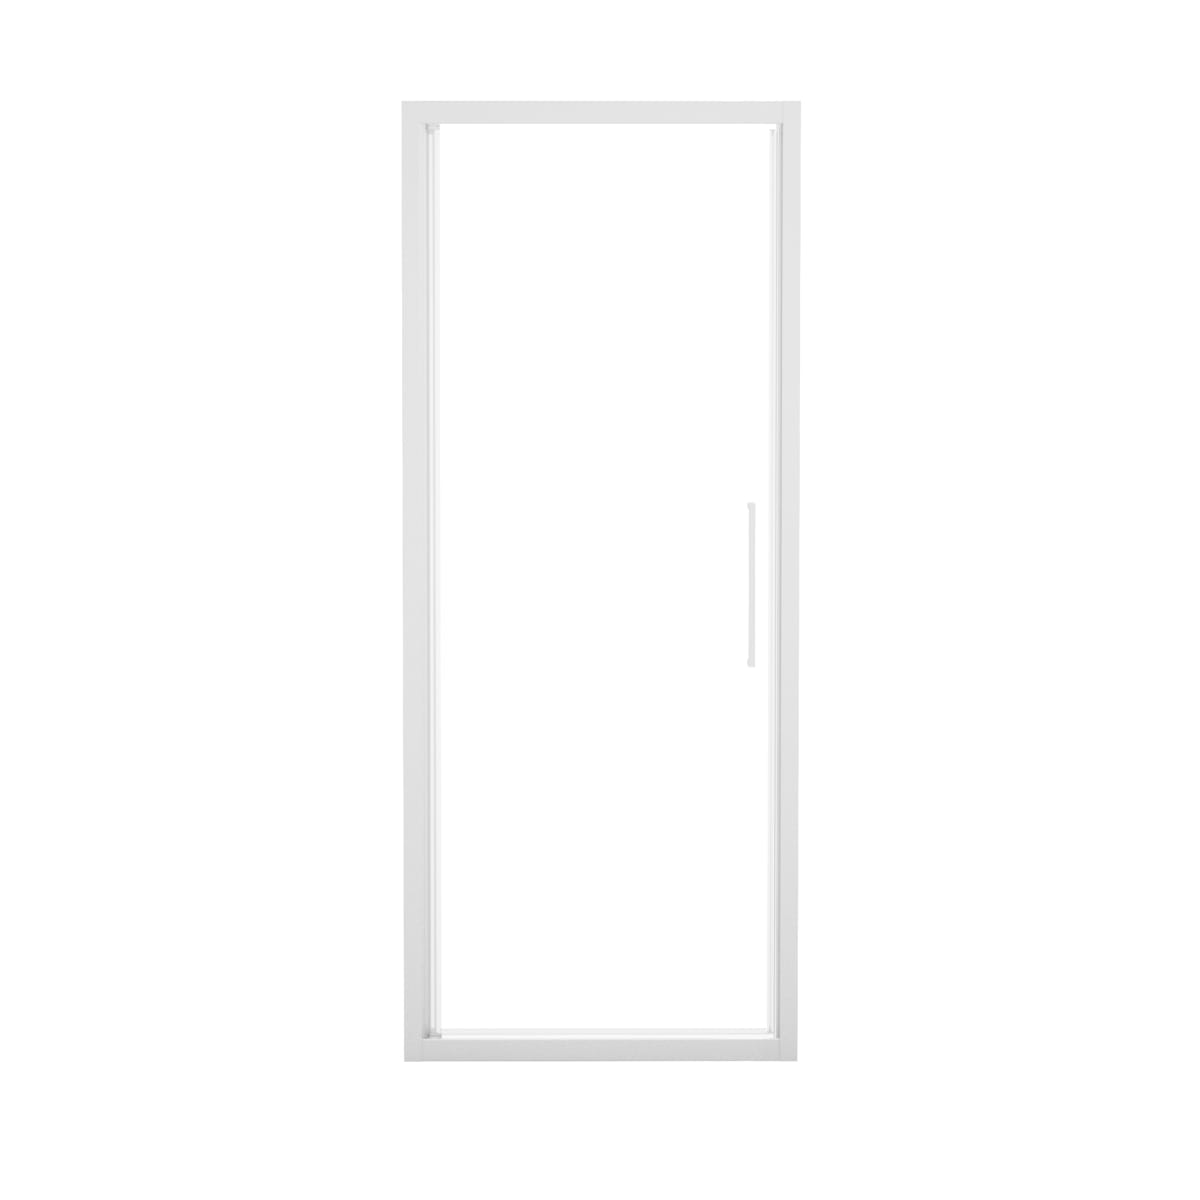 RECORD SWING DOOR L 72-76 H 195 CM CLEAR GLASS 6 MM WHITE